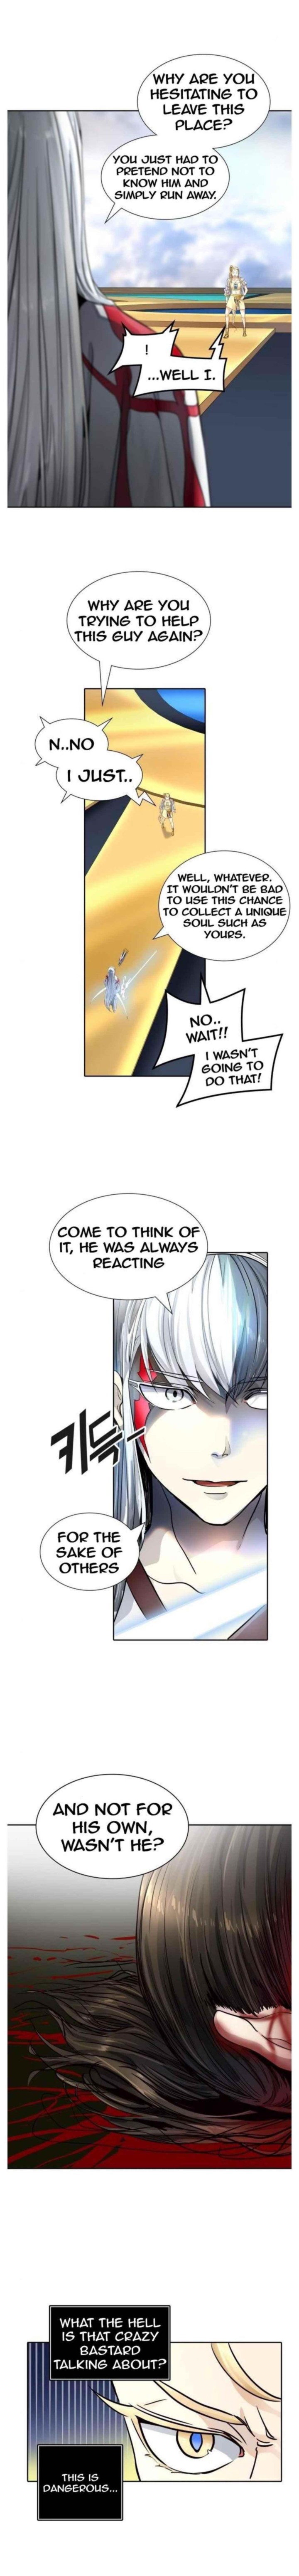 Tower Of God 506 16